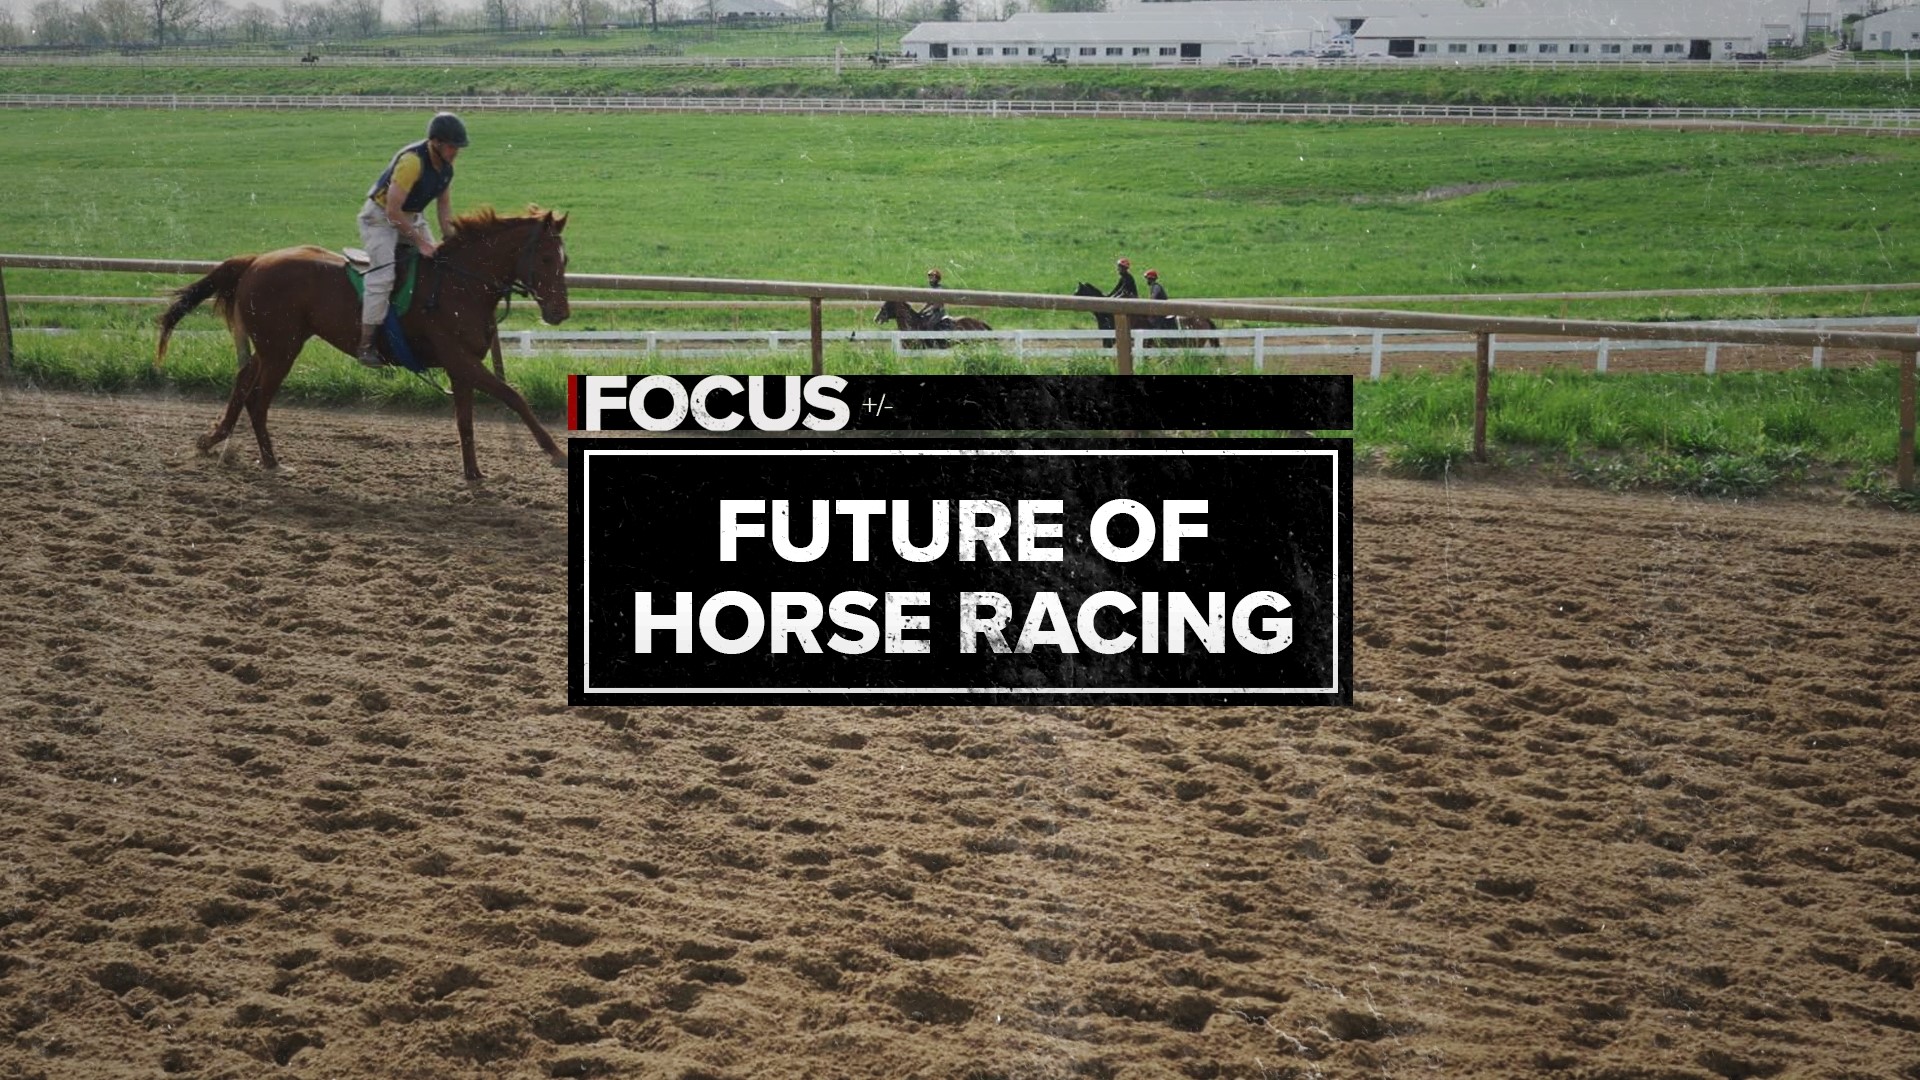 The Run For The Roses is anticipating a fresh start with changes coming to help protect horse racing's future, which is so valuable to Kentucky.